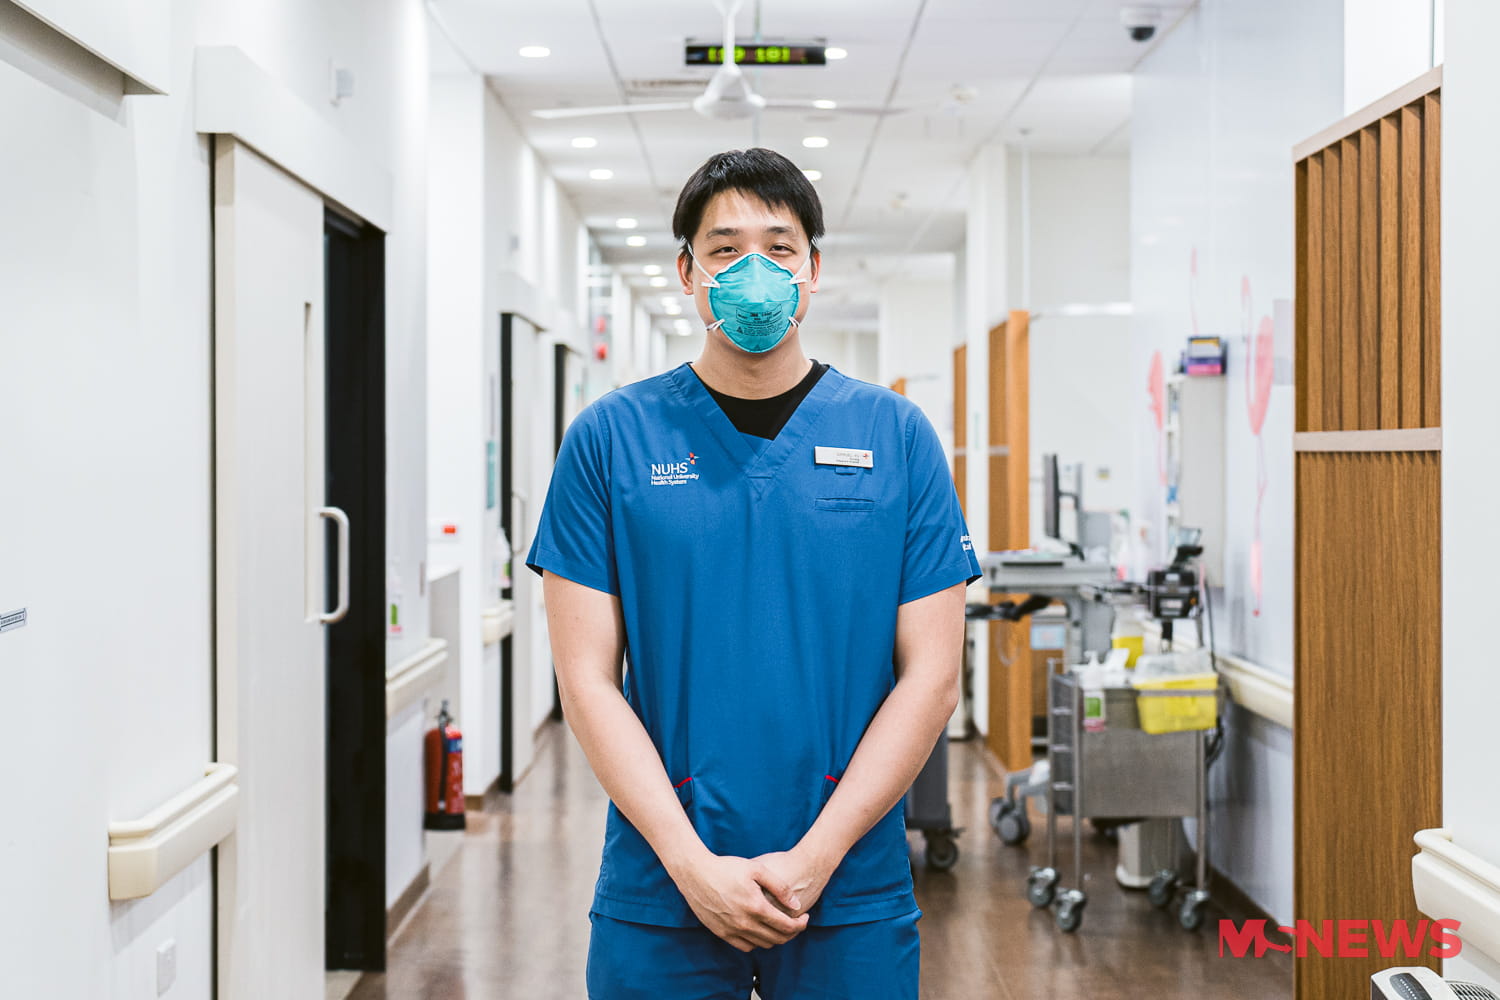 Former Water Polo Player, 26, Chose Nursing Over Representing S’pore, Says Caring For Others Is His Calling - Must Share News (Picture 1)